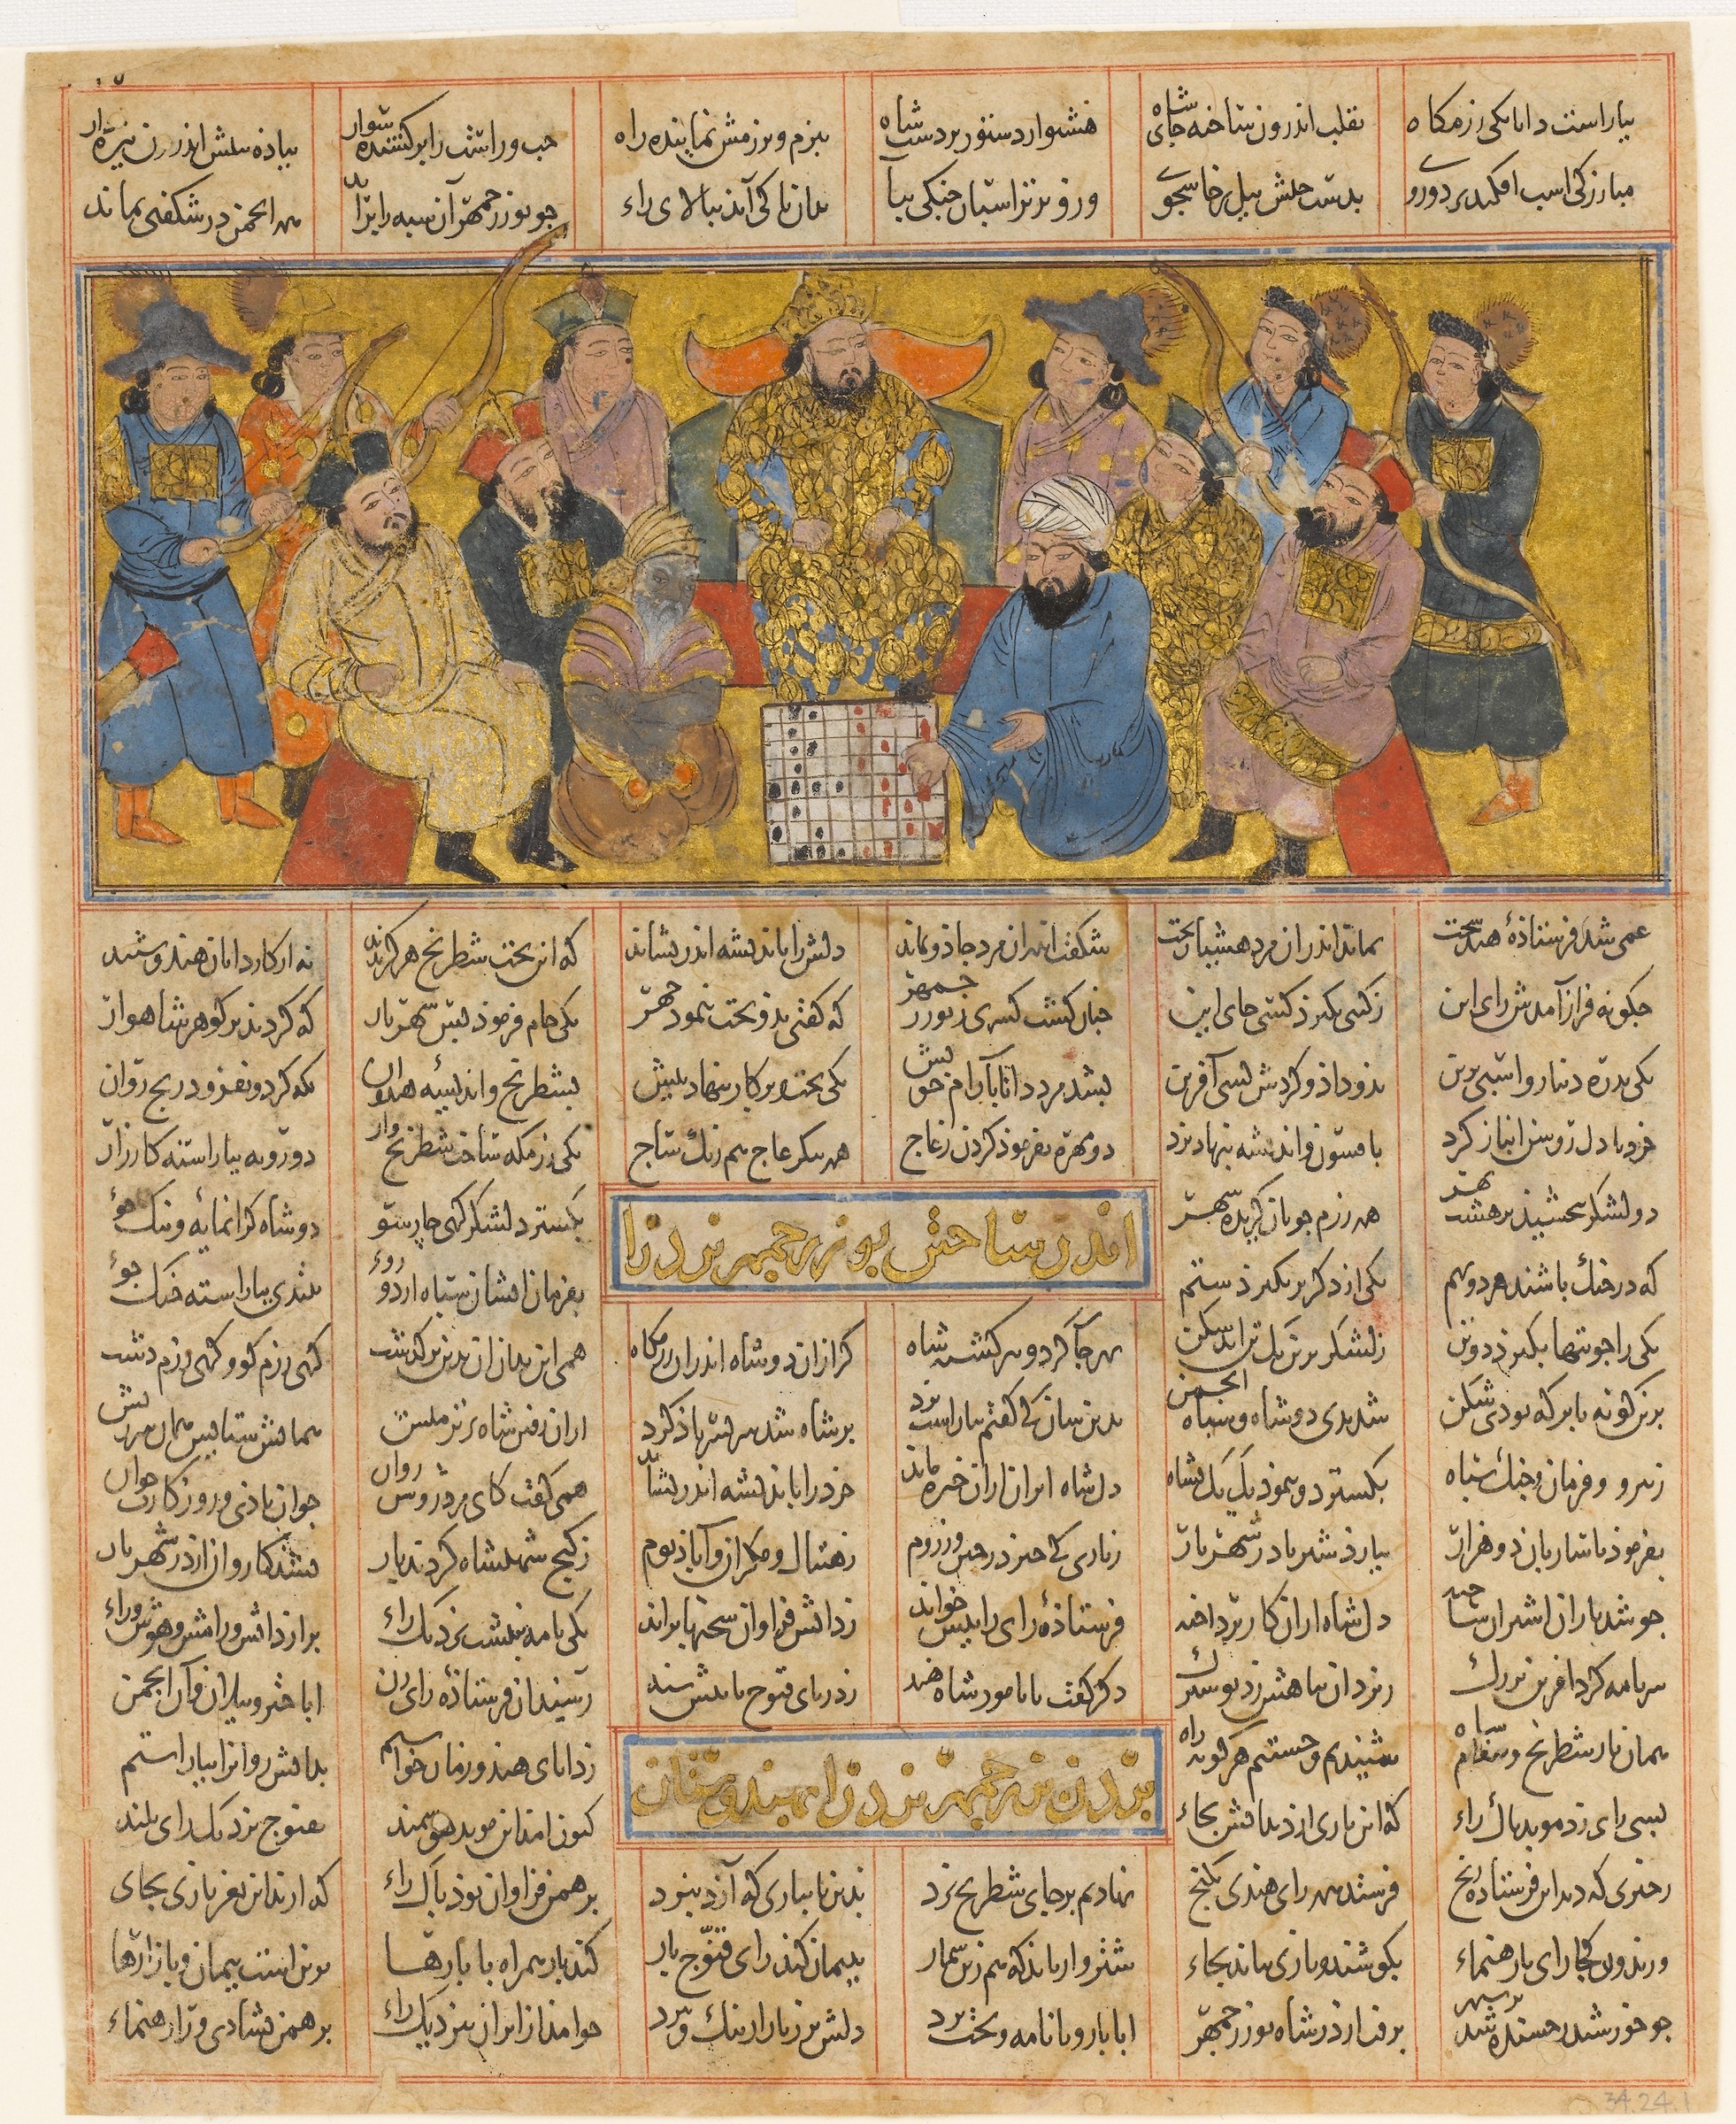 "Buzurgmihr Masters the Game of Chess," folio from a Shahnama (Book of Kings), c. 1300–30, ink, opaque watercolor, and gold on paper, 16.2 x 13.3 cm, Iran or Iraq (The Metropolitan Museum of Art)